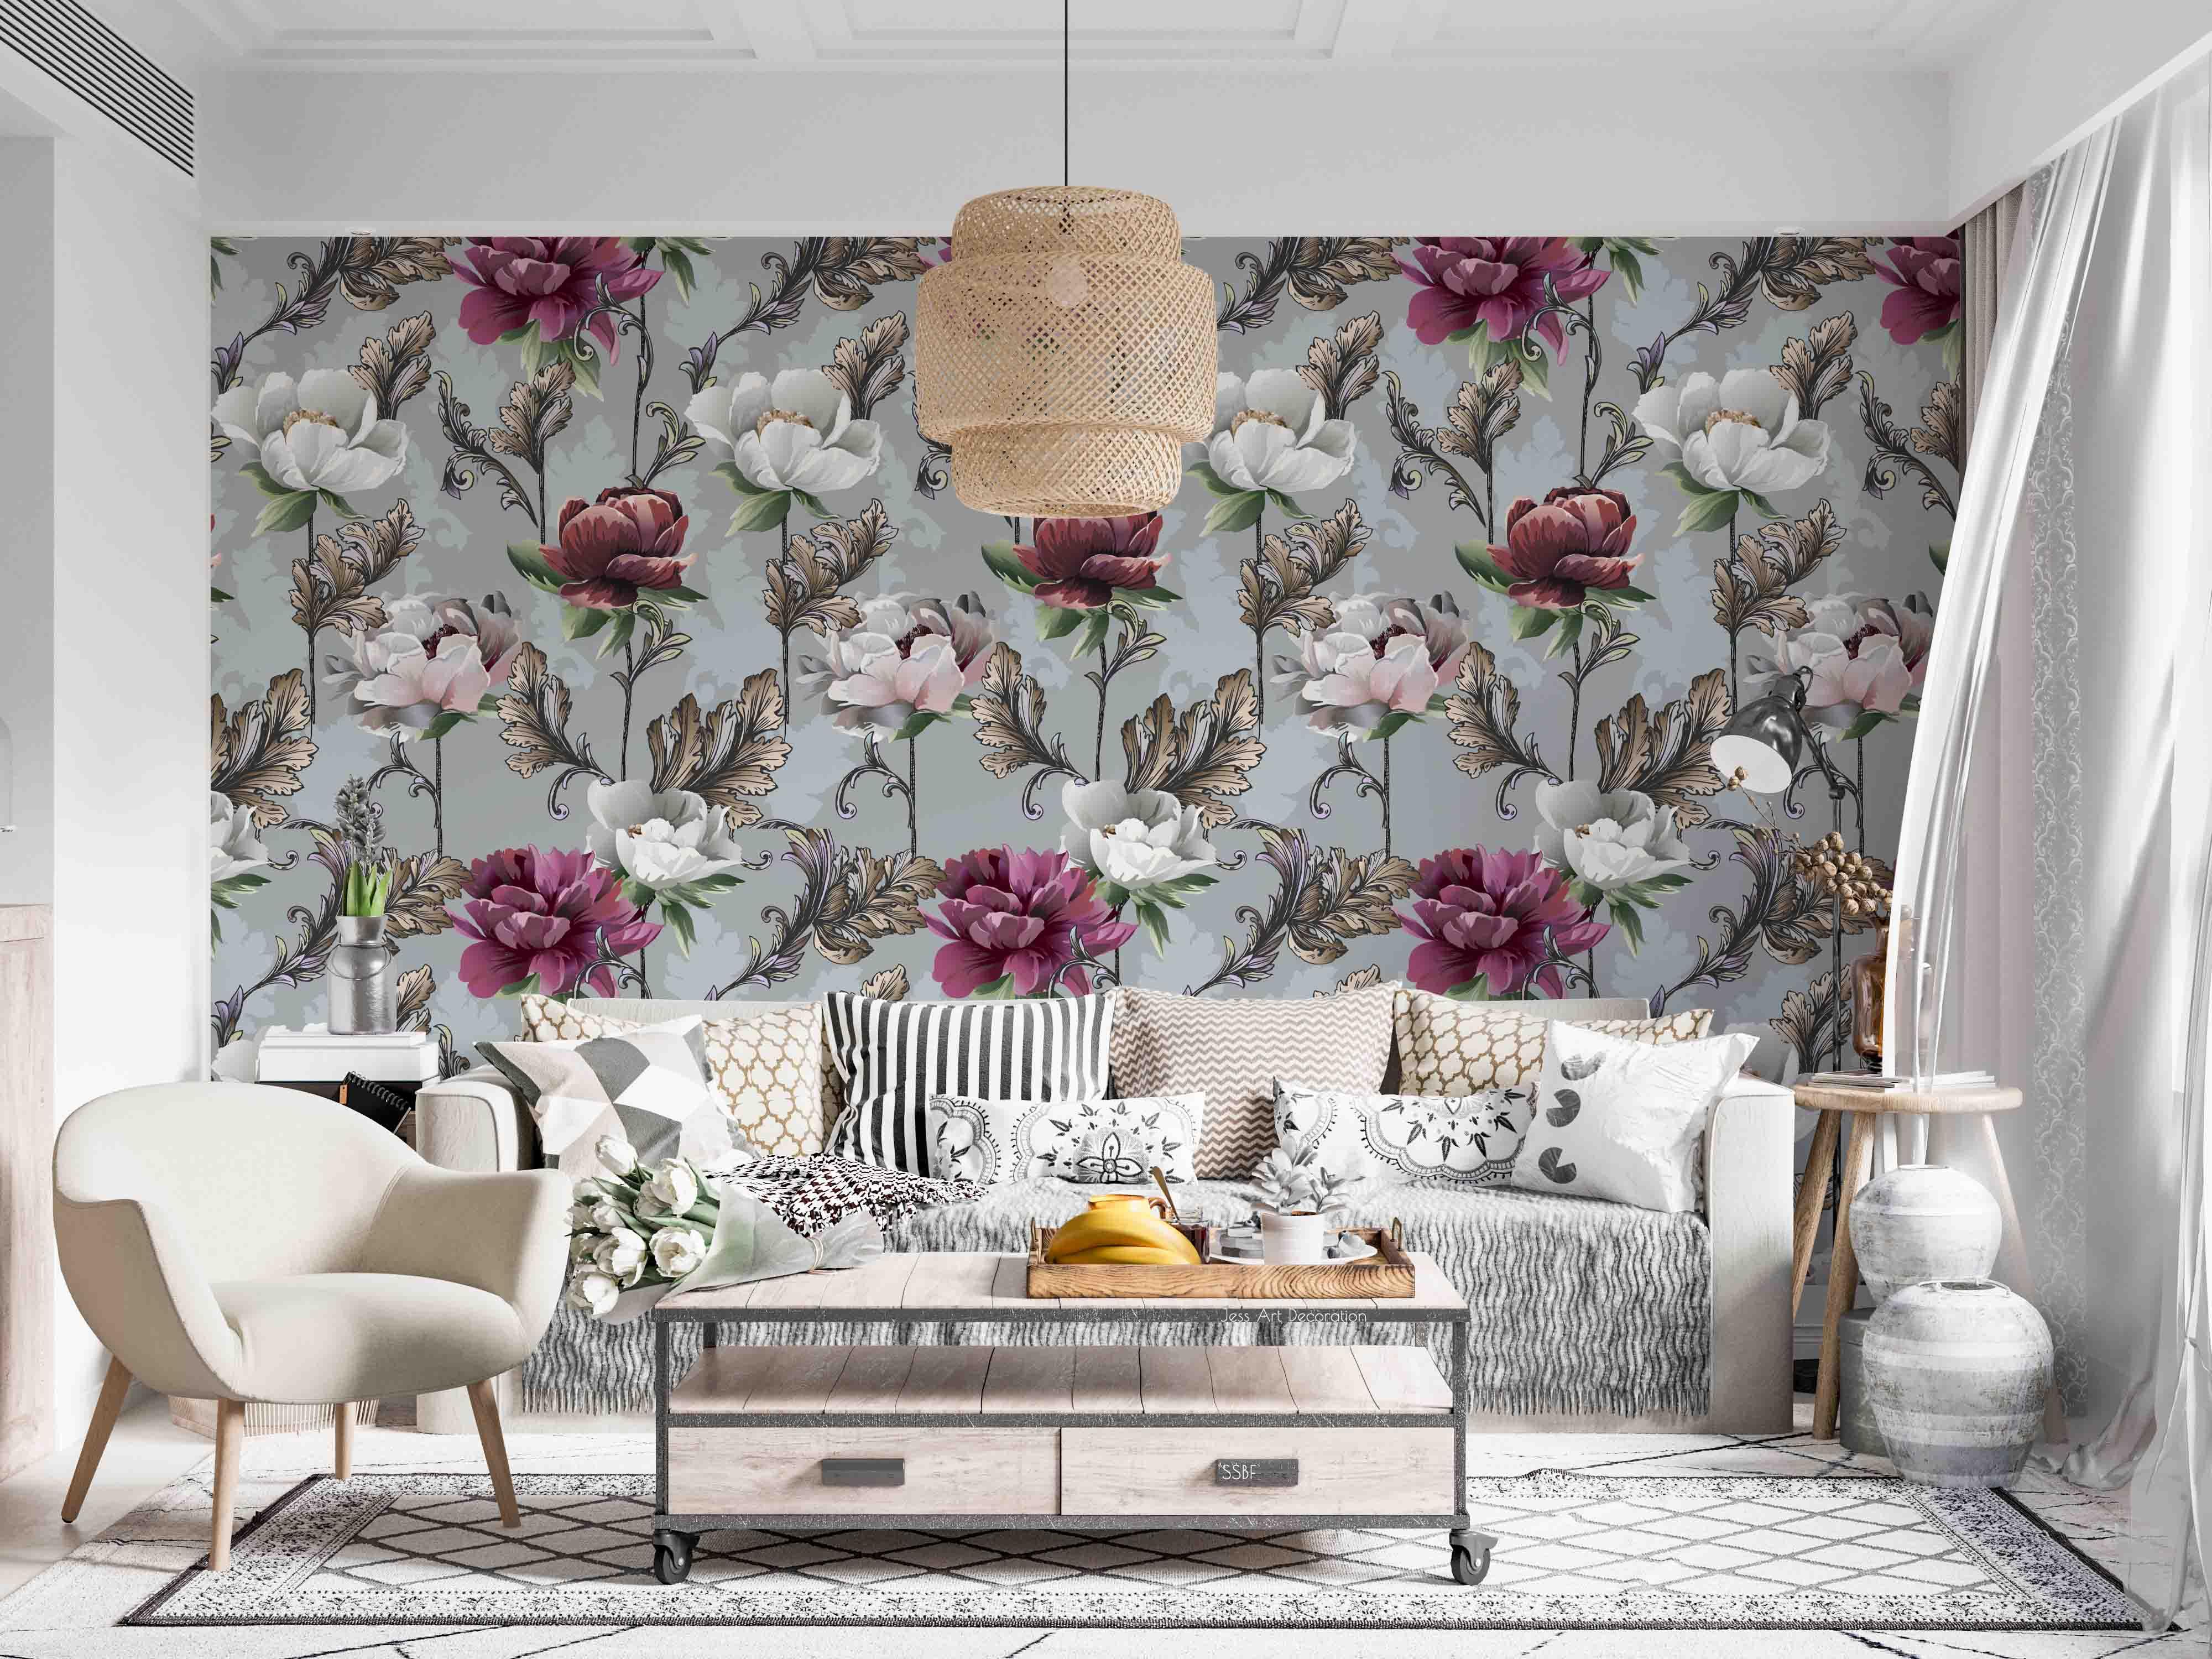 3D Vintage Blooming Pink Flowers Leaves Pattern Wall Mural Wallpaper GD 3530- Jess Art Decoration